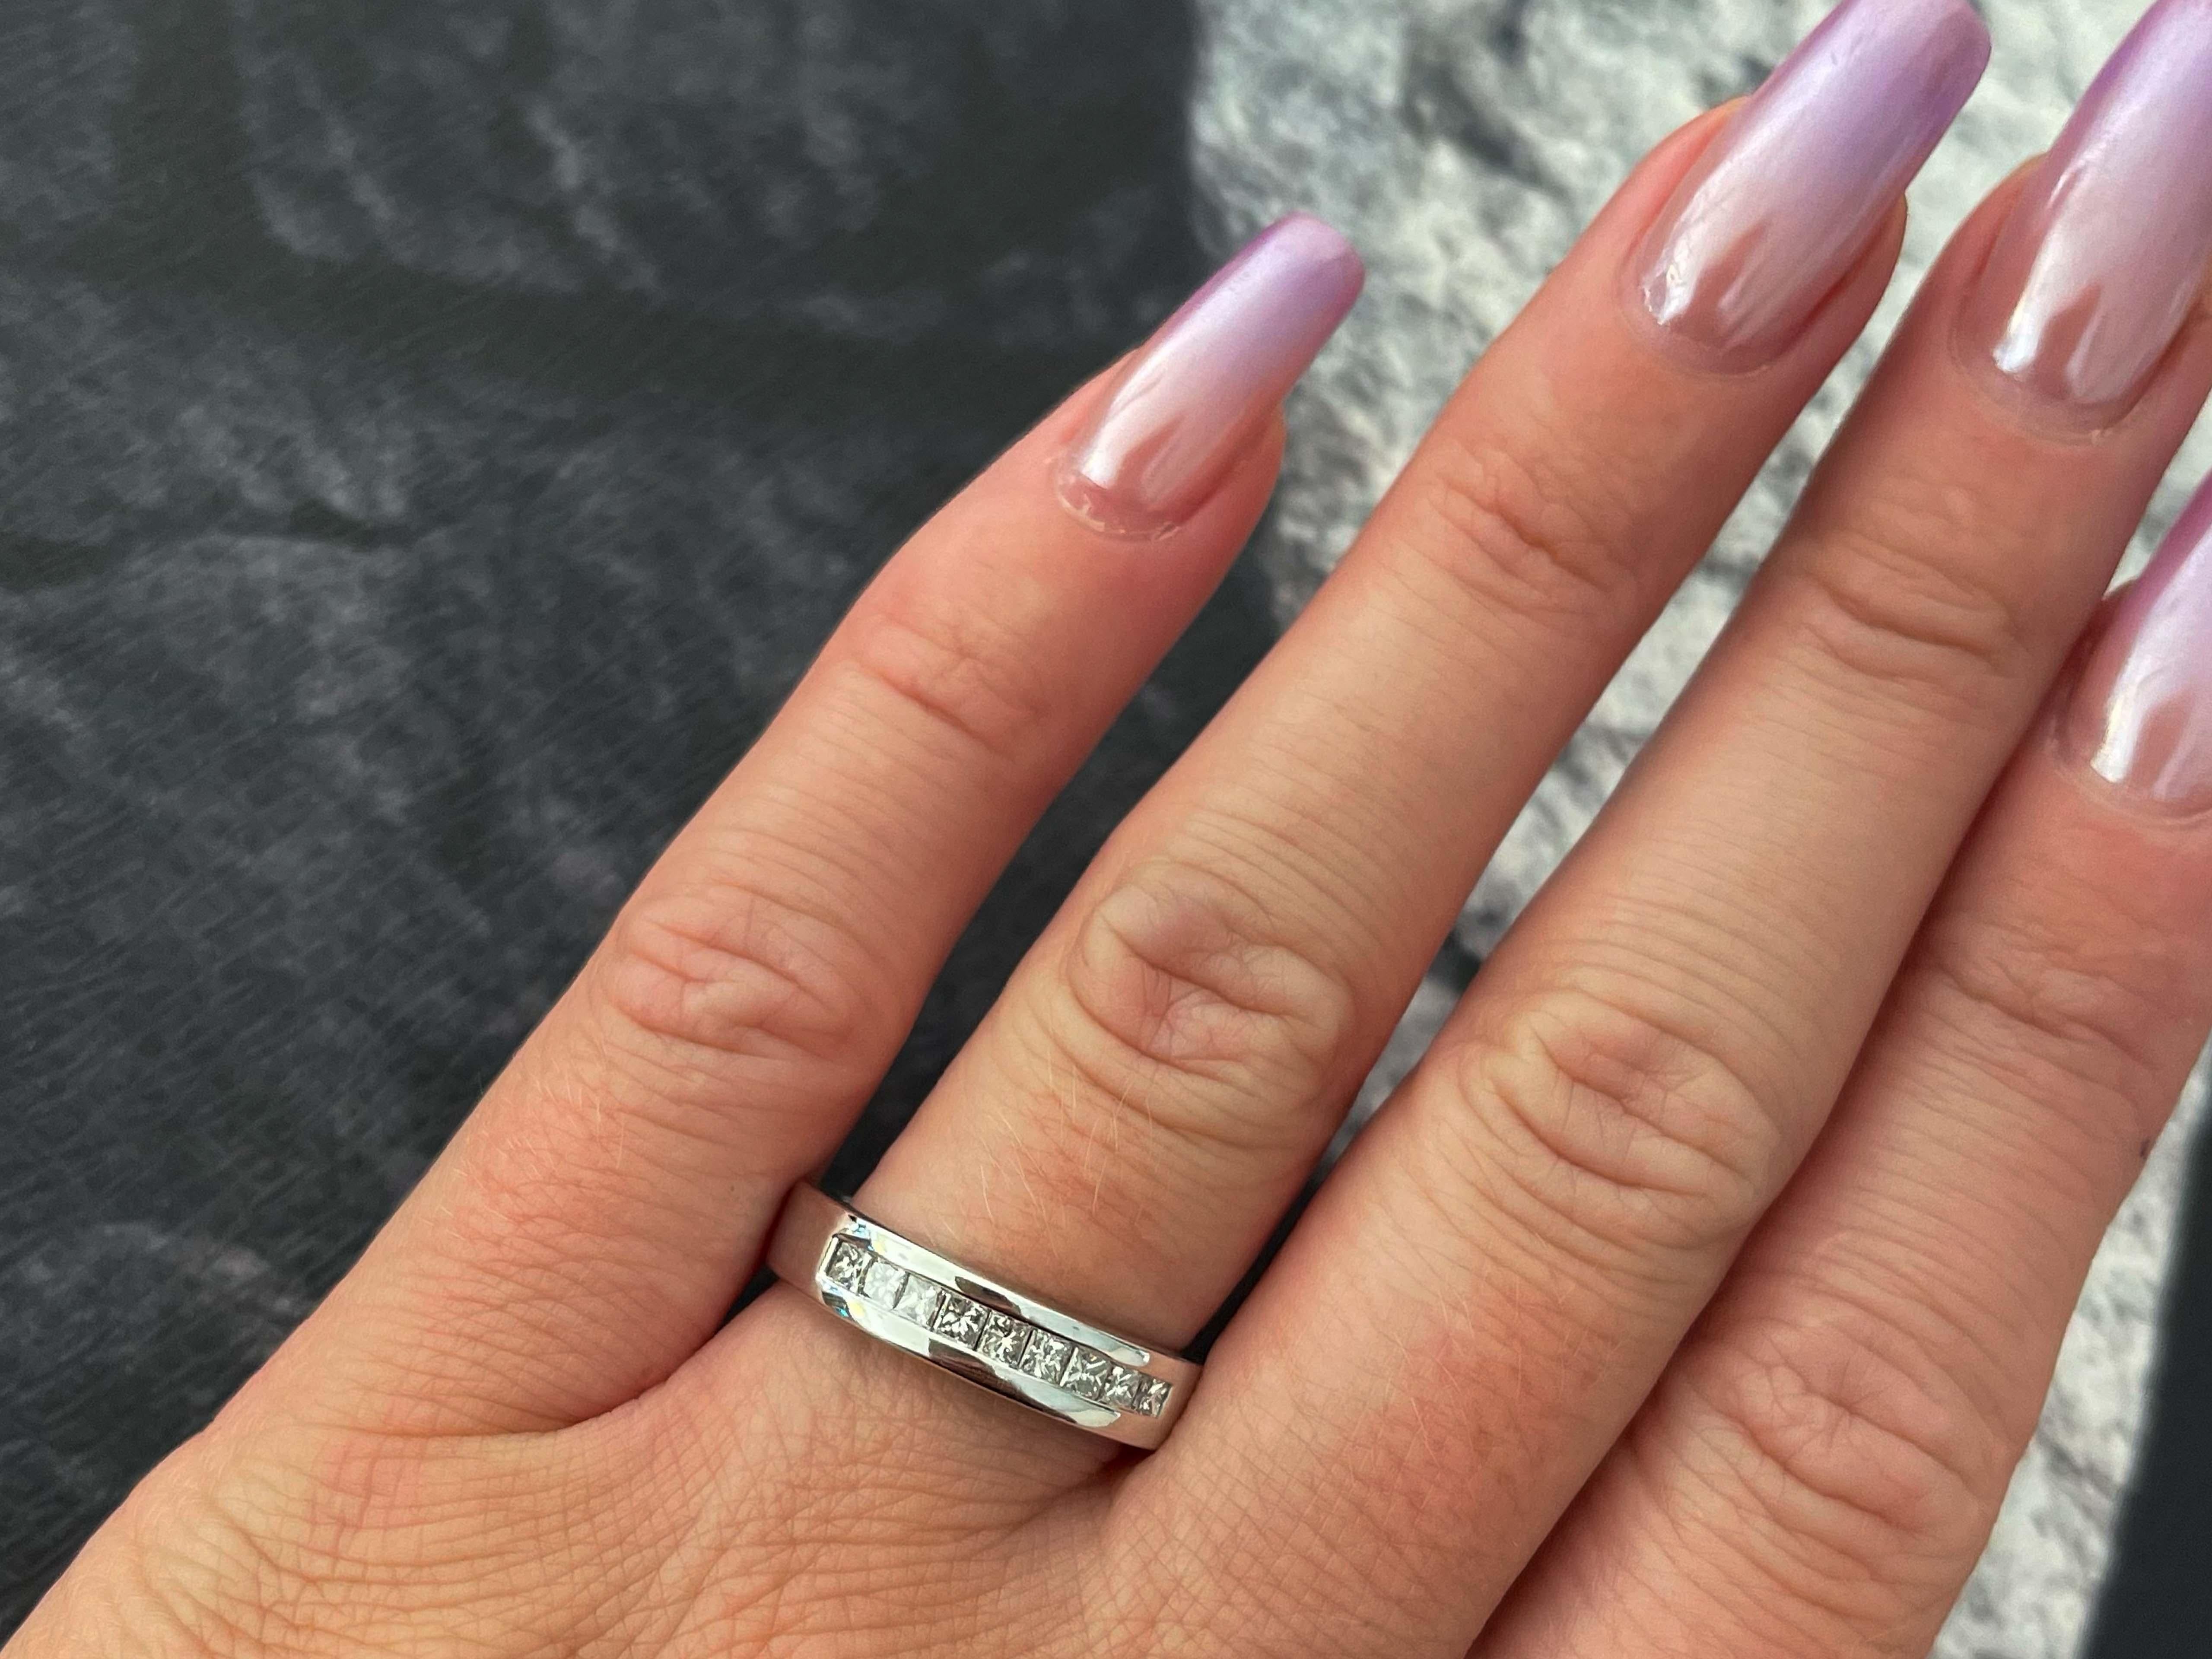 Item Specifications:

Metal: 14k White Gold

Diamond Count: 9 princess cut

Total Diamond Carat Weight: ~0.50 carats 

Diamond Color: I

Diamond Clarity: SI2

Ring Height: ~4.90 mm 

Ring Size: 8.25

Total Weight: 5.6 Grams

Stamped: